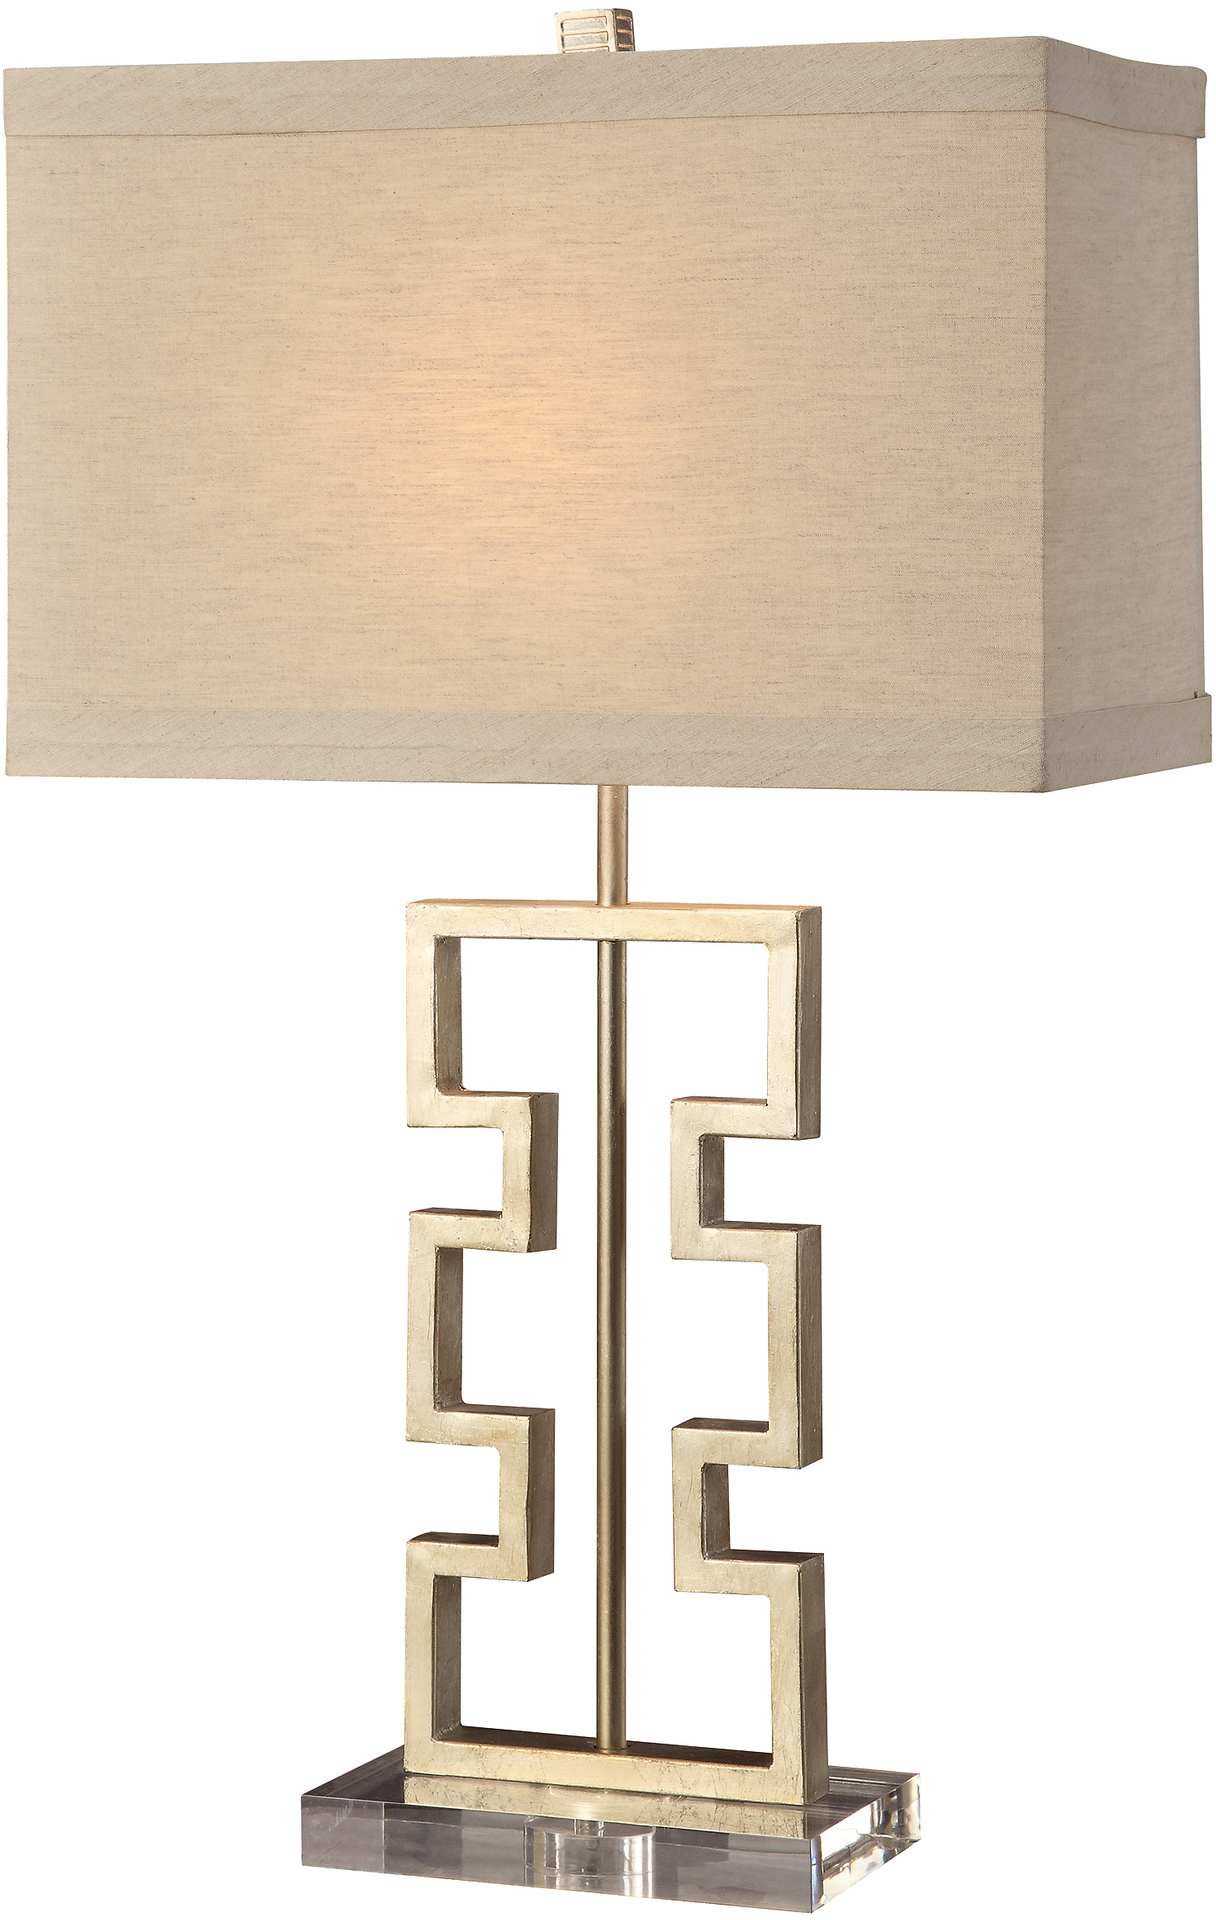 Crestview Collection Azteca Silver Leaf Table Lamp